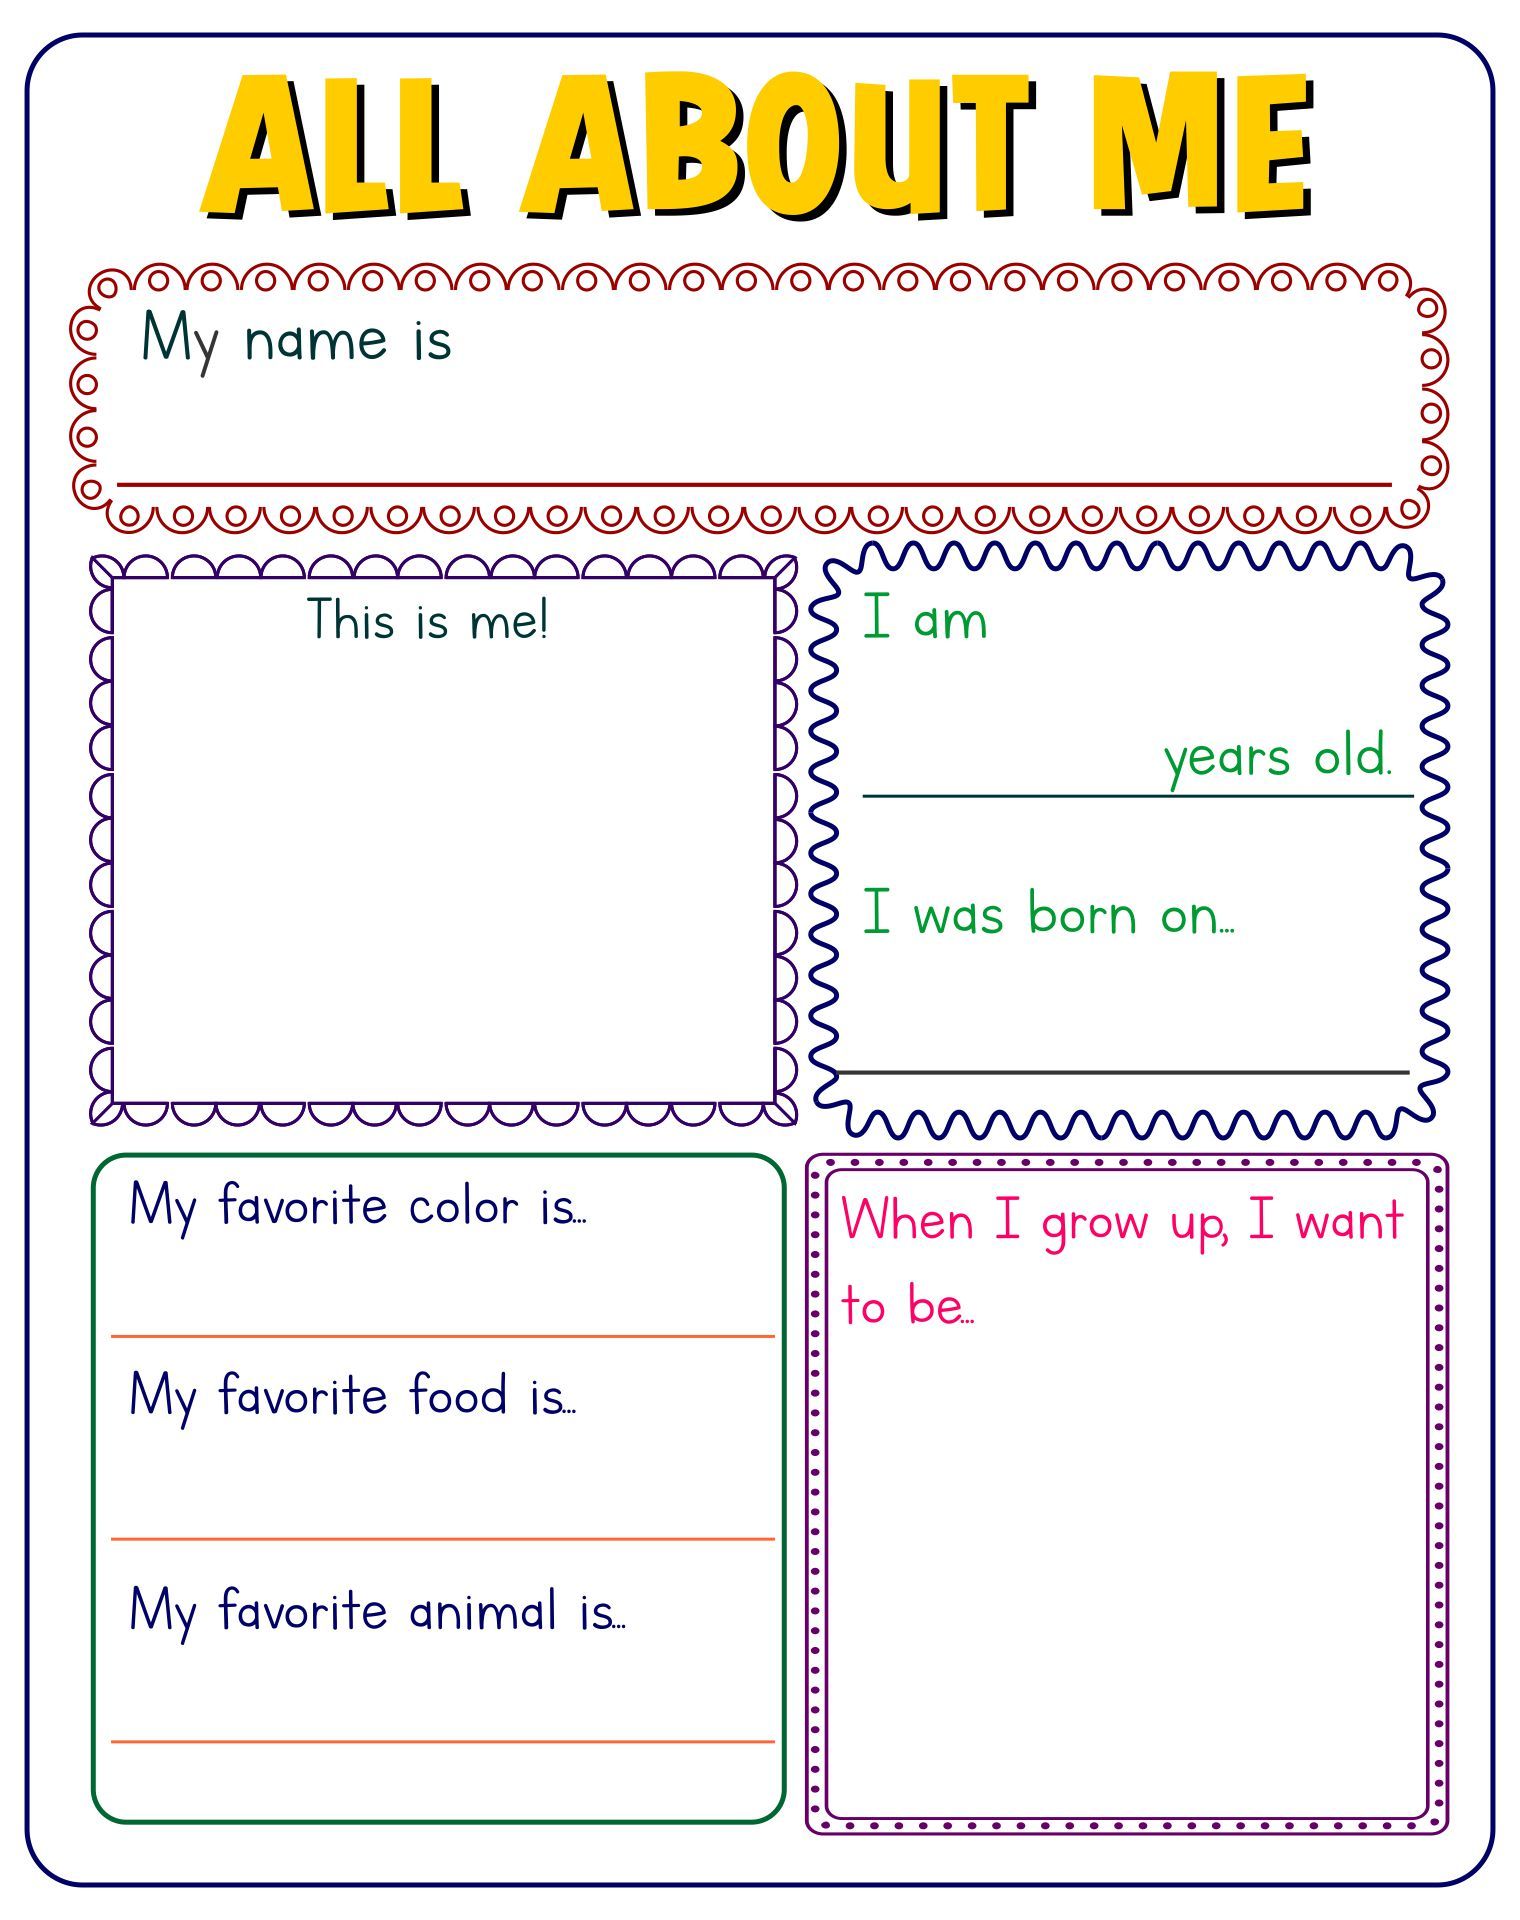 Printable All About Me Template Poster_58964